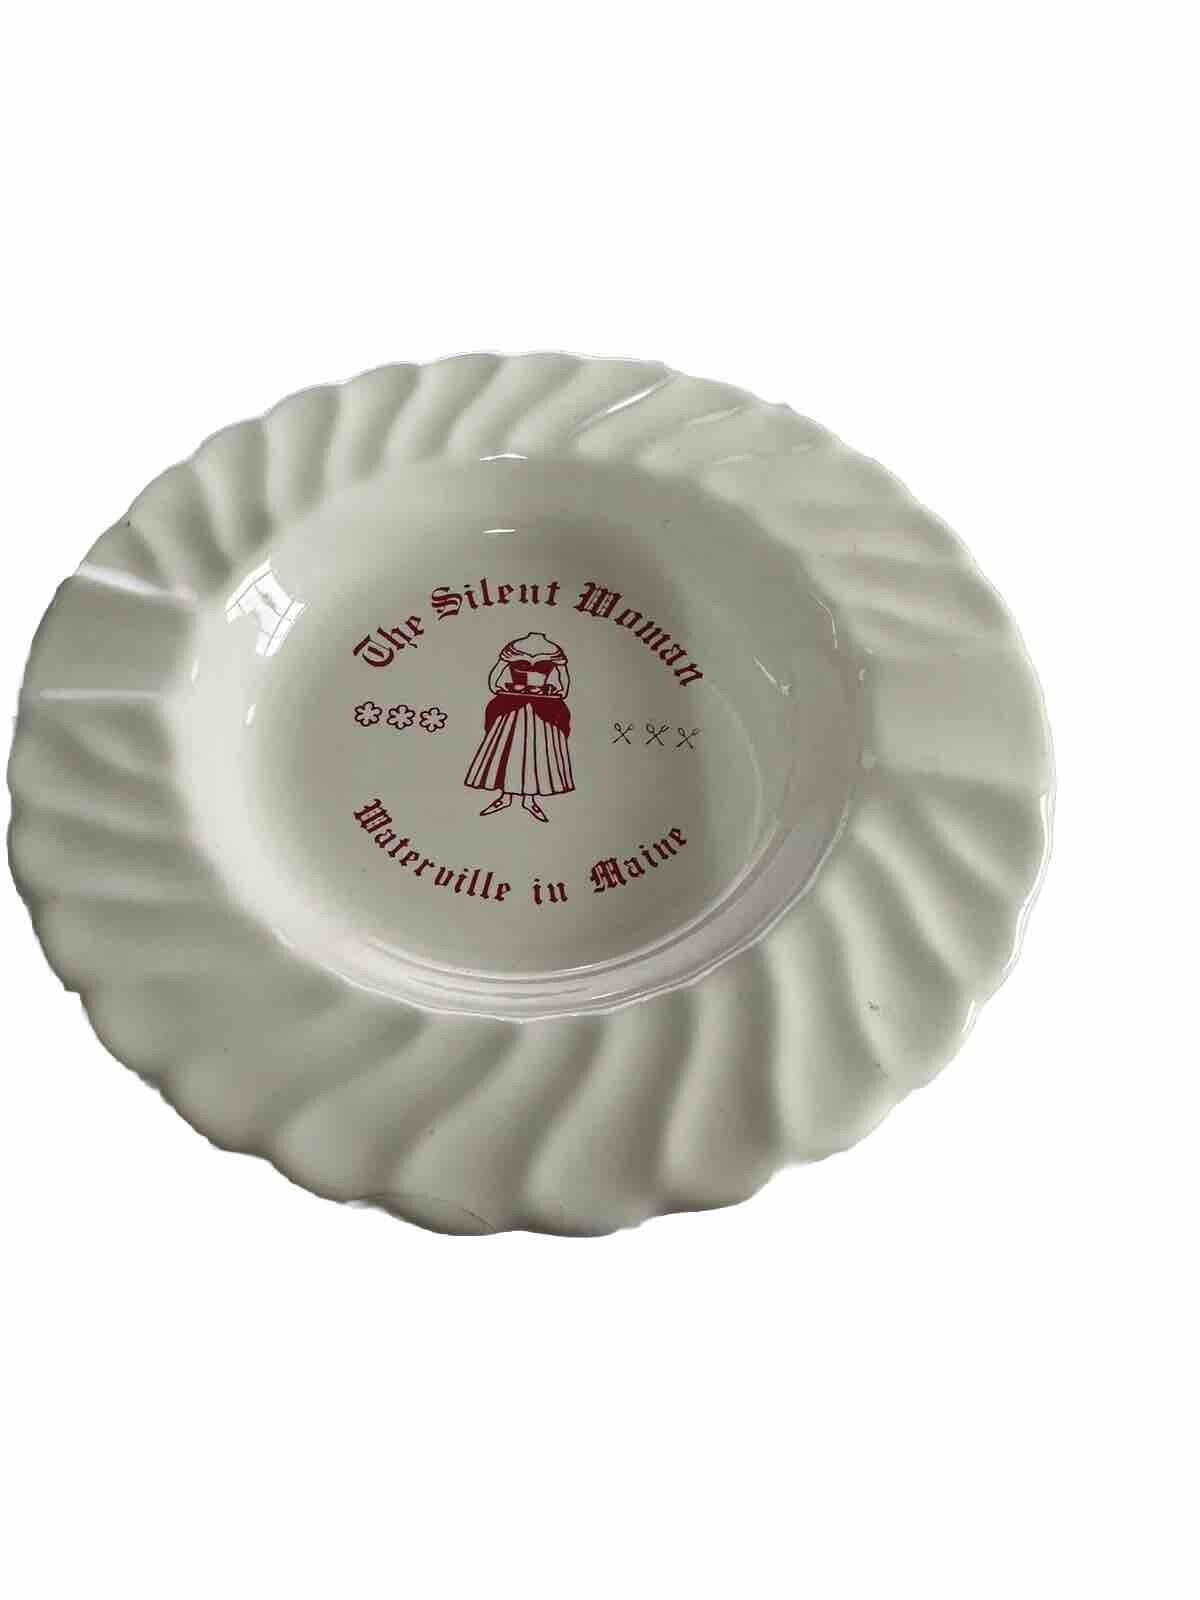 The Silent Woman Waterville in Maine Vintage Restaurants Ashtray